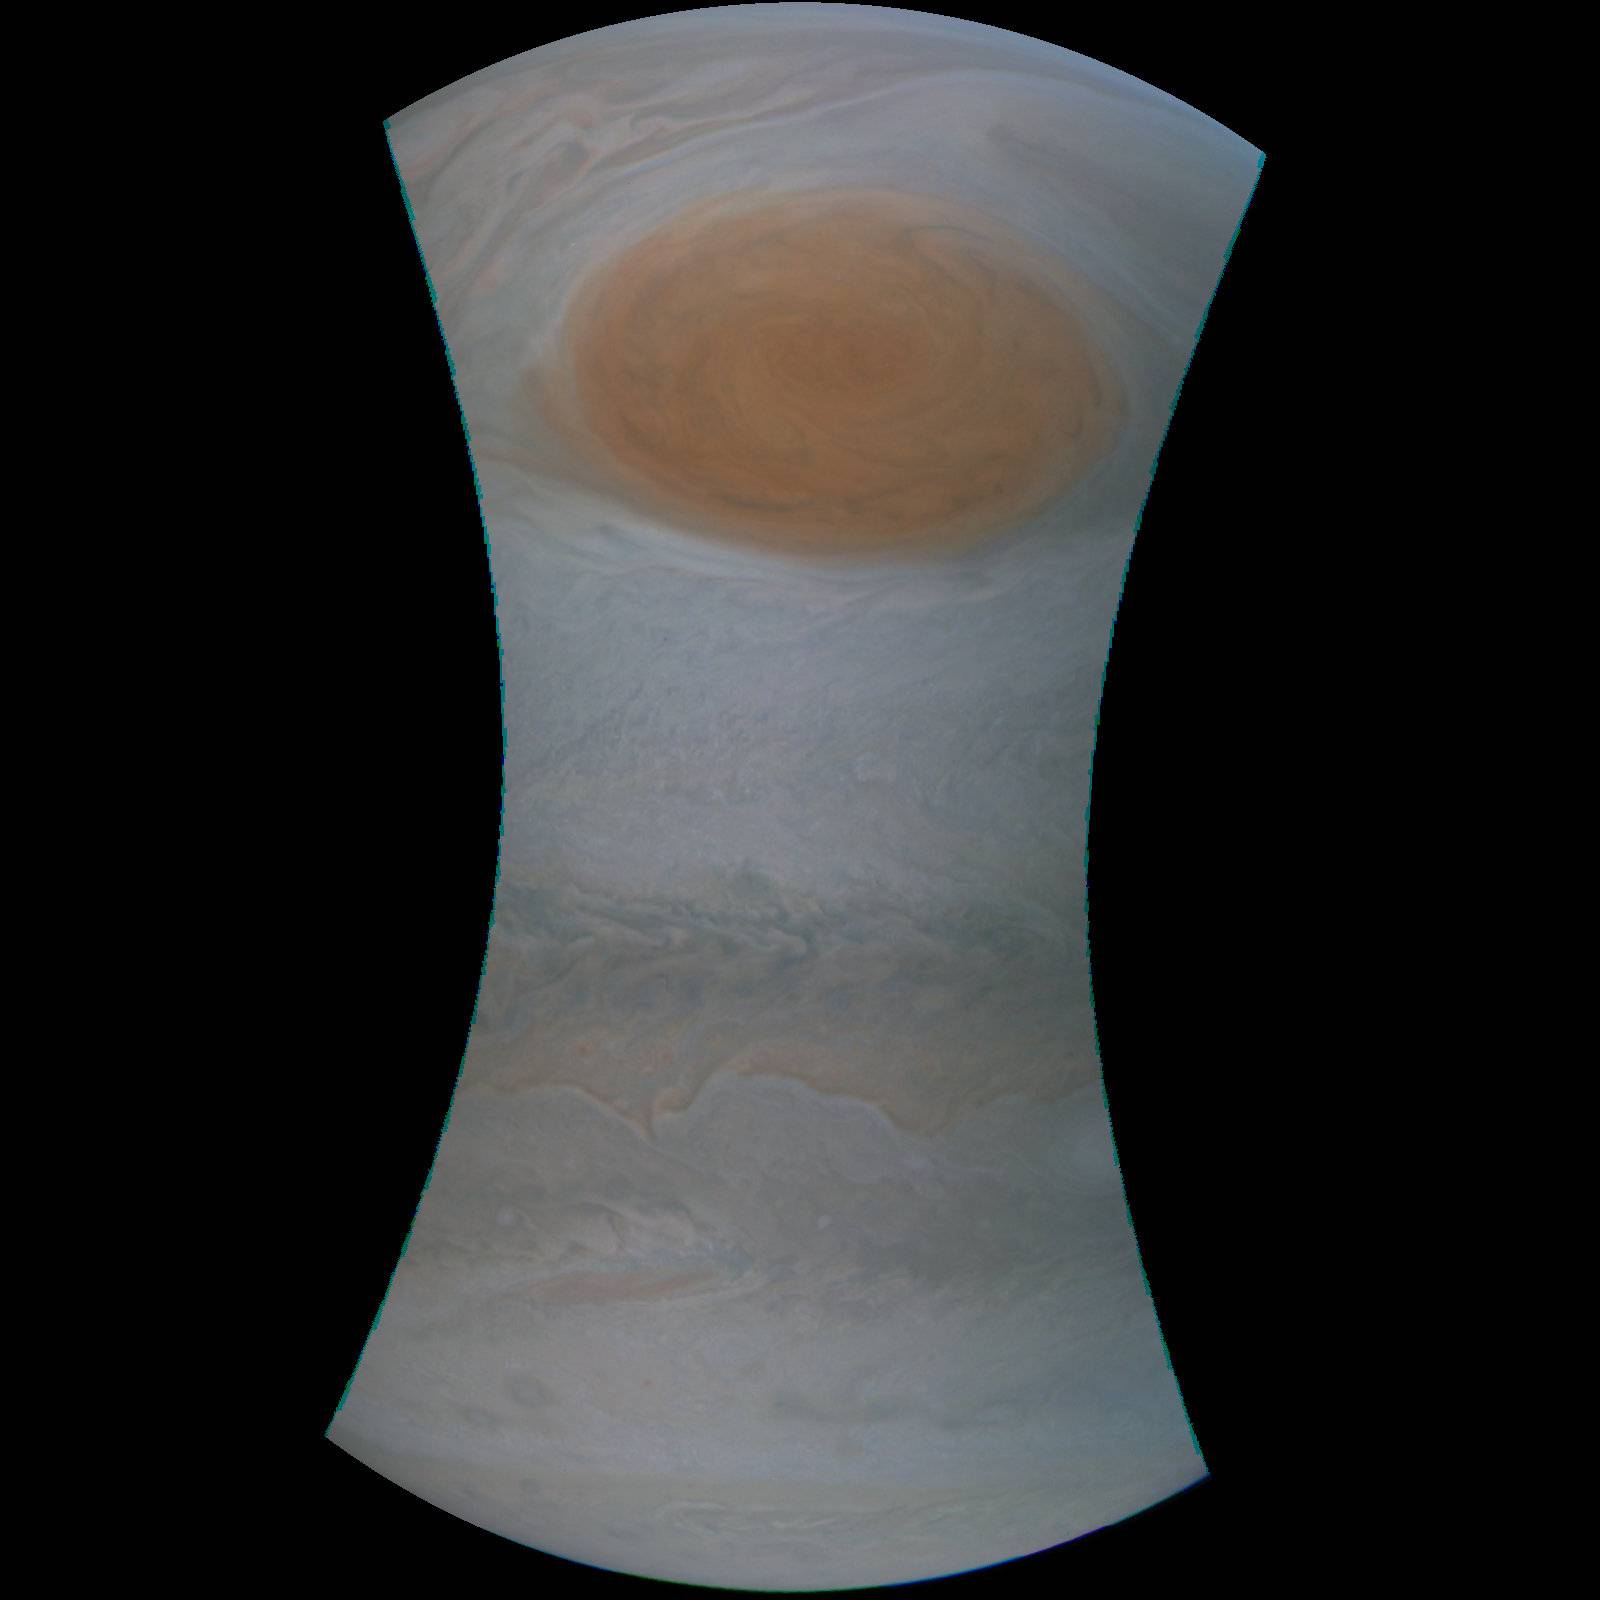 NASA Juno spacecraft photo of the Great Red Spot on Jupiter